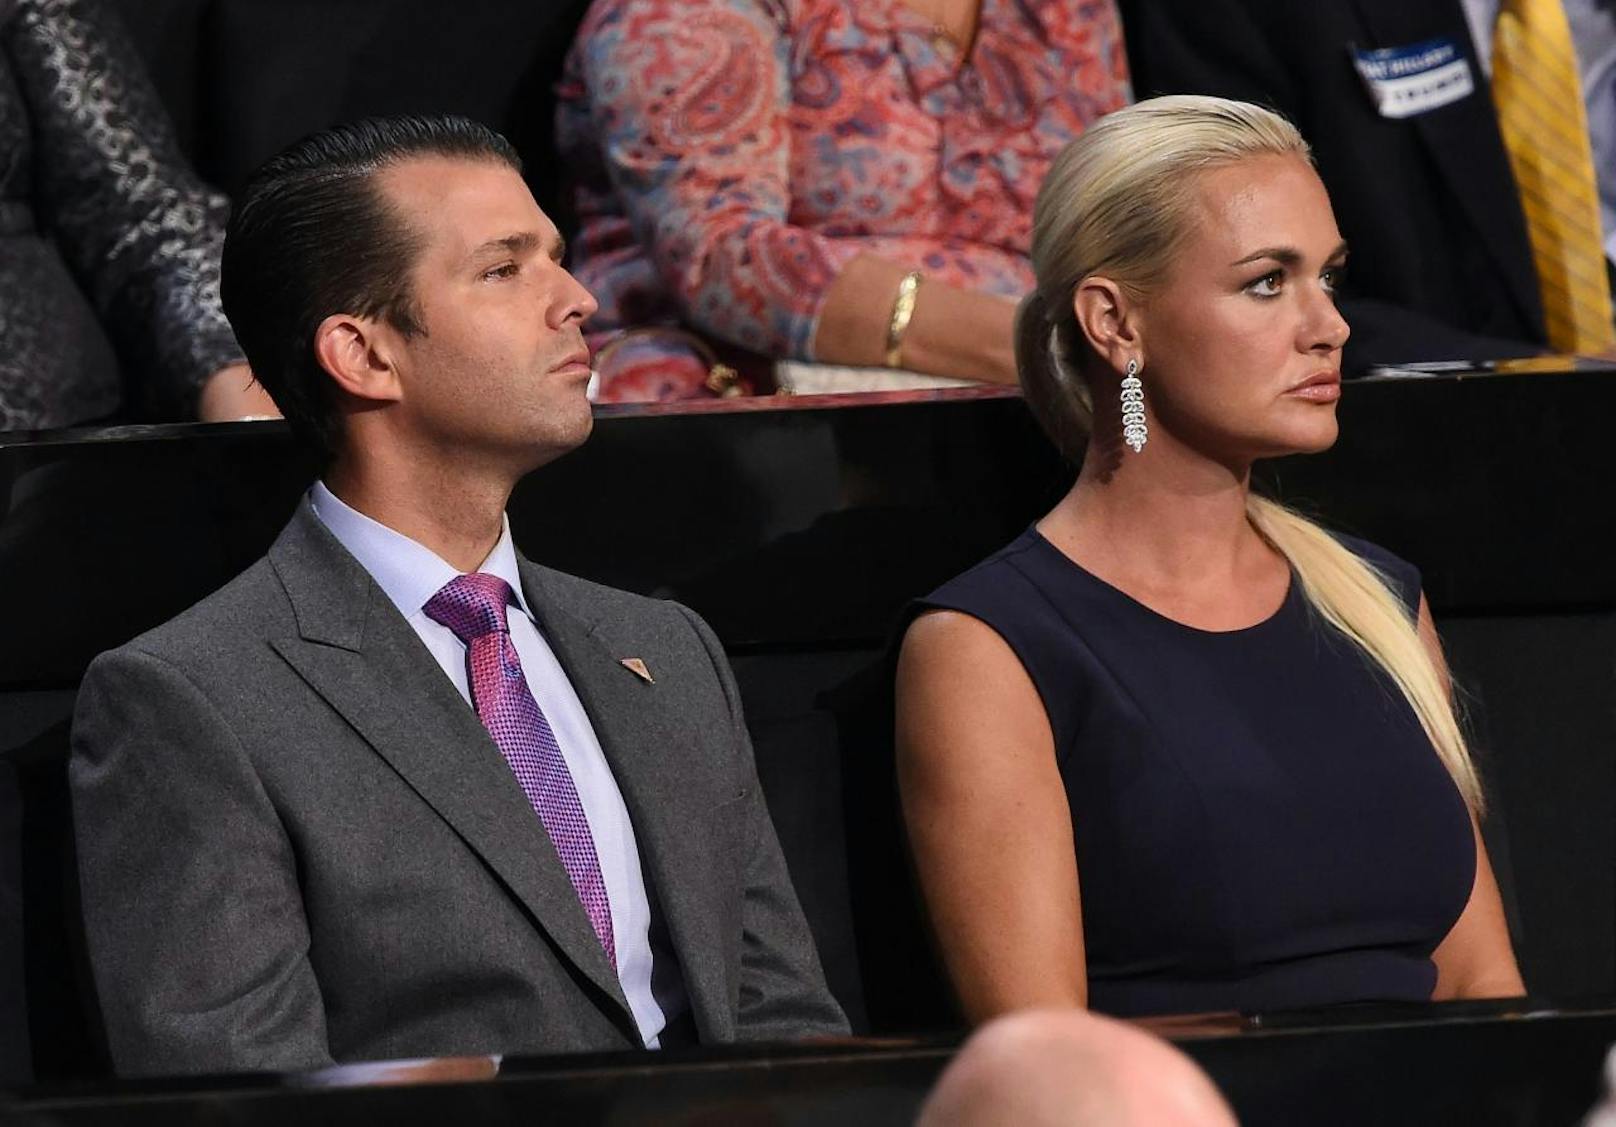 Download von www.picturedesk.com am 15.03.2018 (14:52). 
(FILES) This file photo taken on July 21, 2016 shows Donald Trump Jr., and his wife Vanessa Trump during the Republican National Convention at the Quicken Loans Arena in Cleveland, Ohio Donald Trump's eldest son on July 11, 2017, released emails showing he embraced Russia's efforts to support his father's presidential campaign. Trump junior was told by an interlocutor that he could get "very high level and sensitive information" that was "part of Russia and its government's support for Mr. Trump." Trump, 39, responded "if it's what you say I love it" and set up a meeting with the source, according to the emails. / AFP PHOTO / Robyn BECK - 20160722_PD15745 - Rechteinfo: Nur für redaktionelle Nutzung! - Editorial Use Only! Werbliche Nutzung nur nach Freigabe!